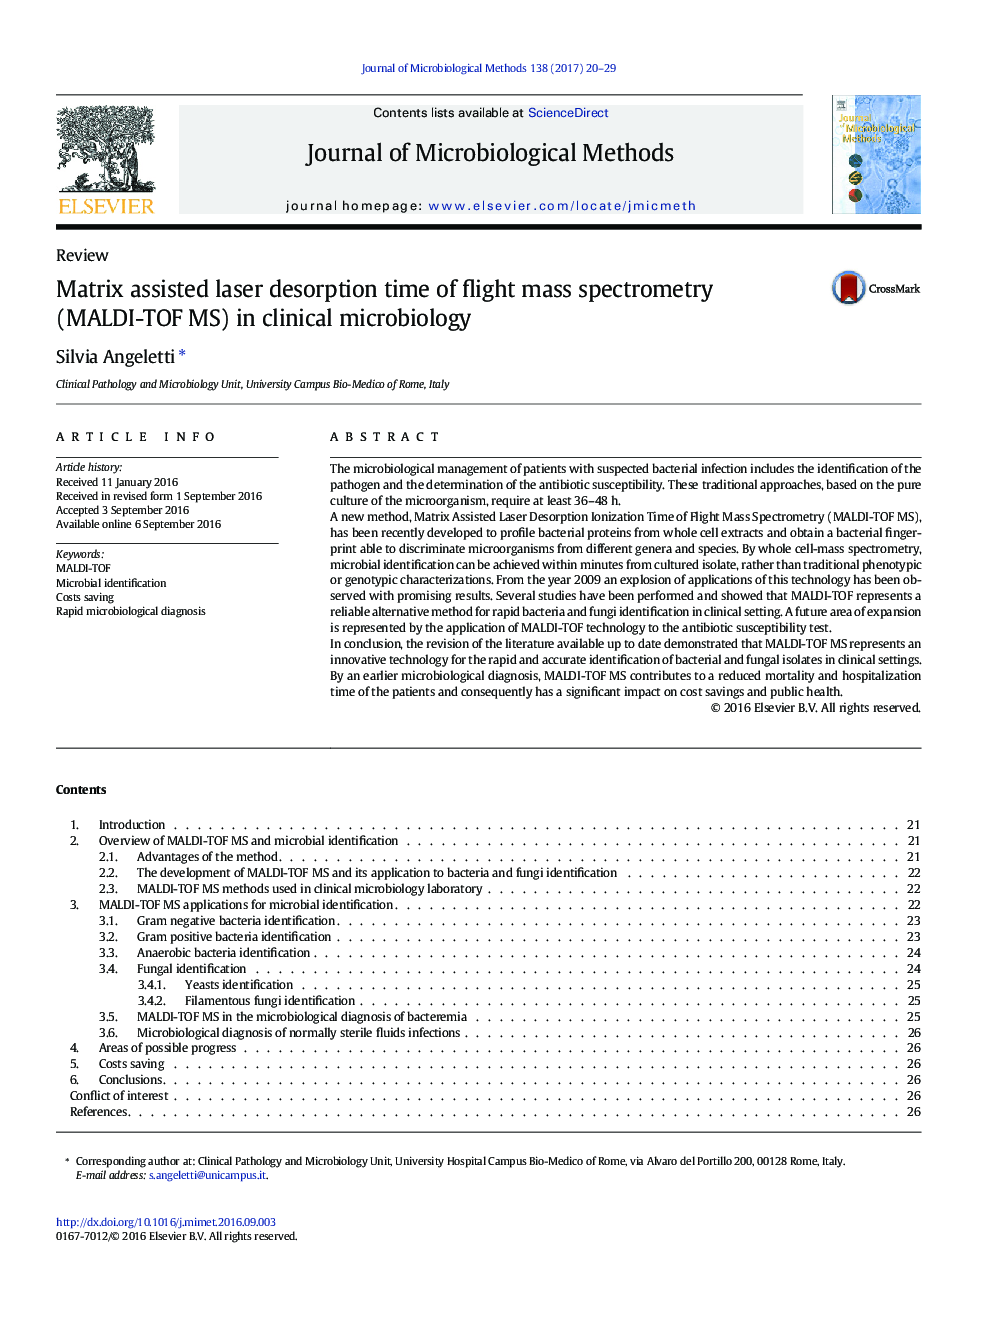 ReviewMatrix assisted laser desorption time of flight mass spectrometry (MALDI-TOF MS) in clinical microbiology